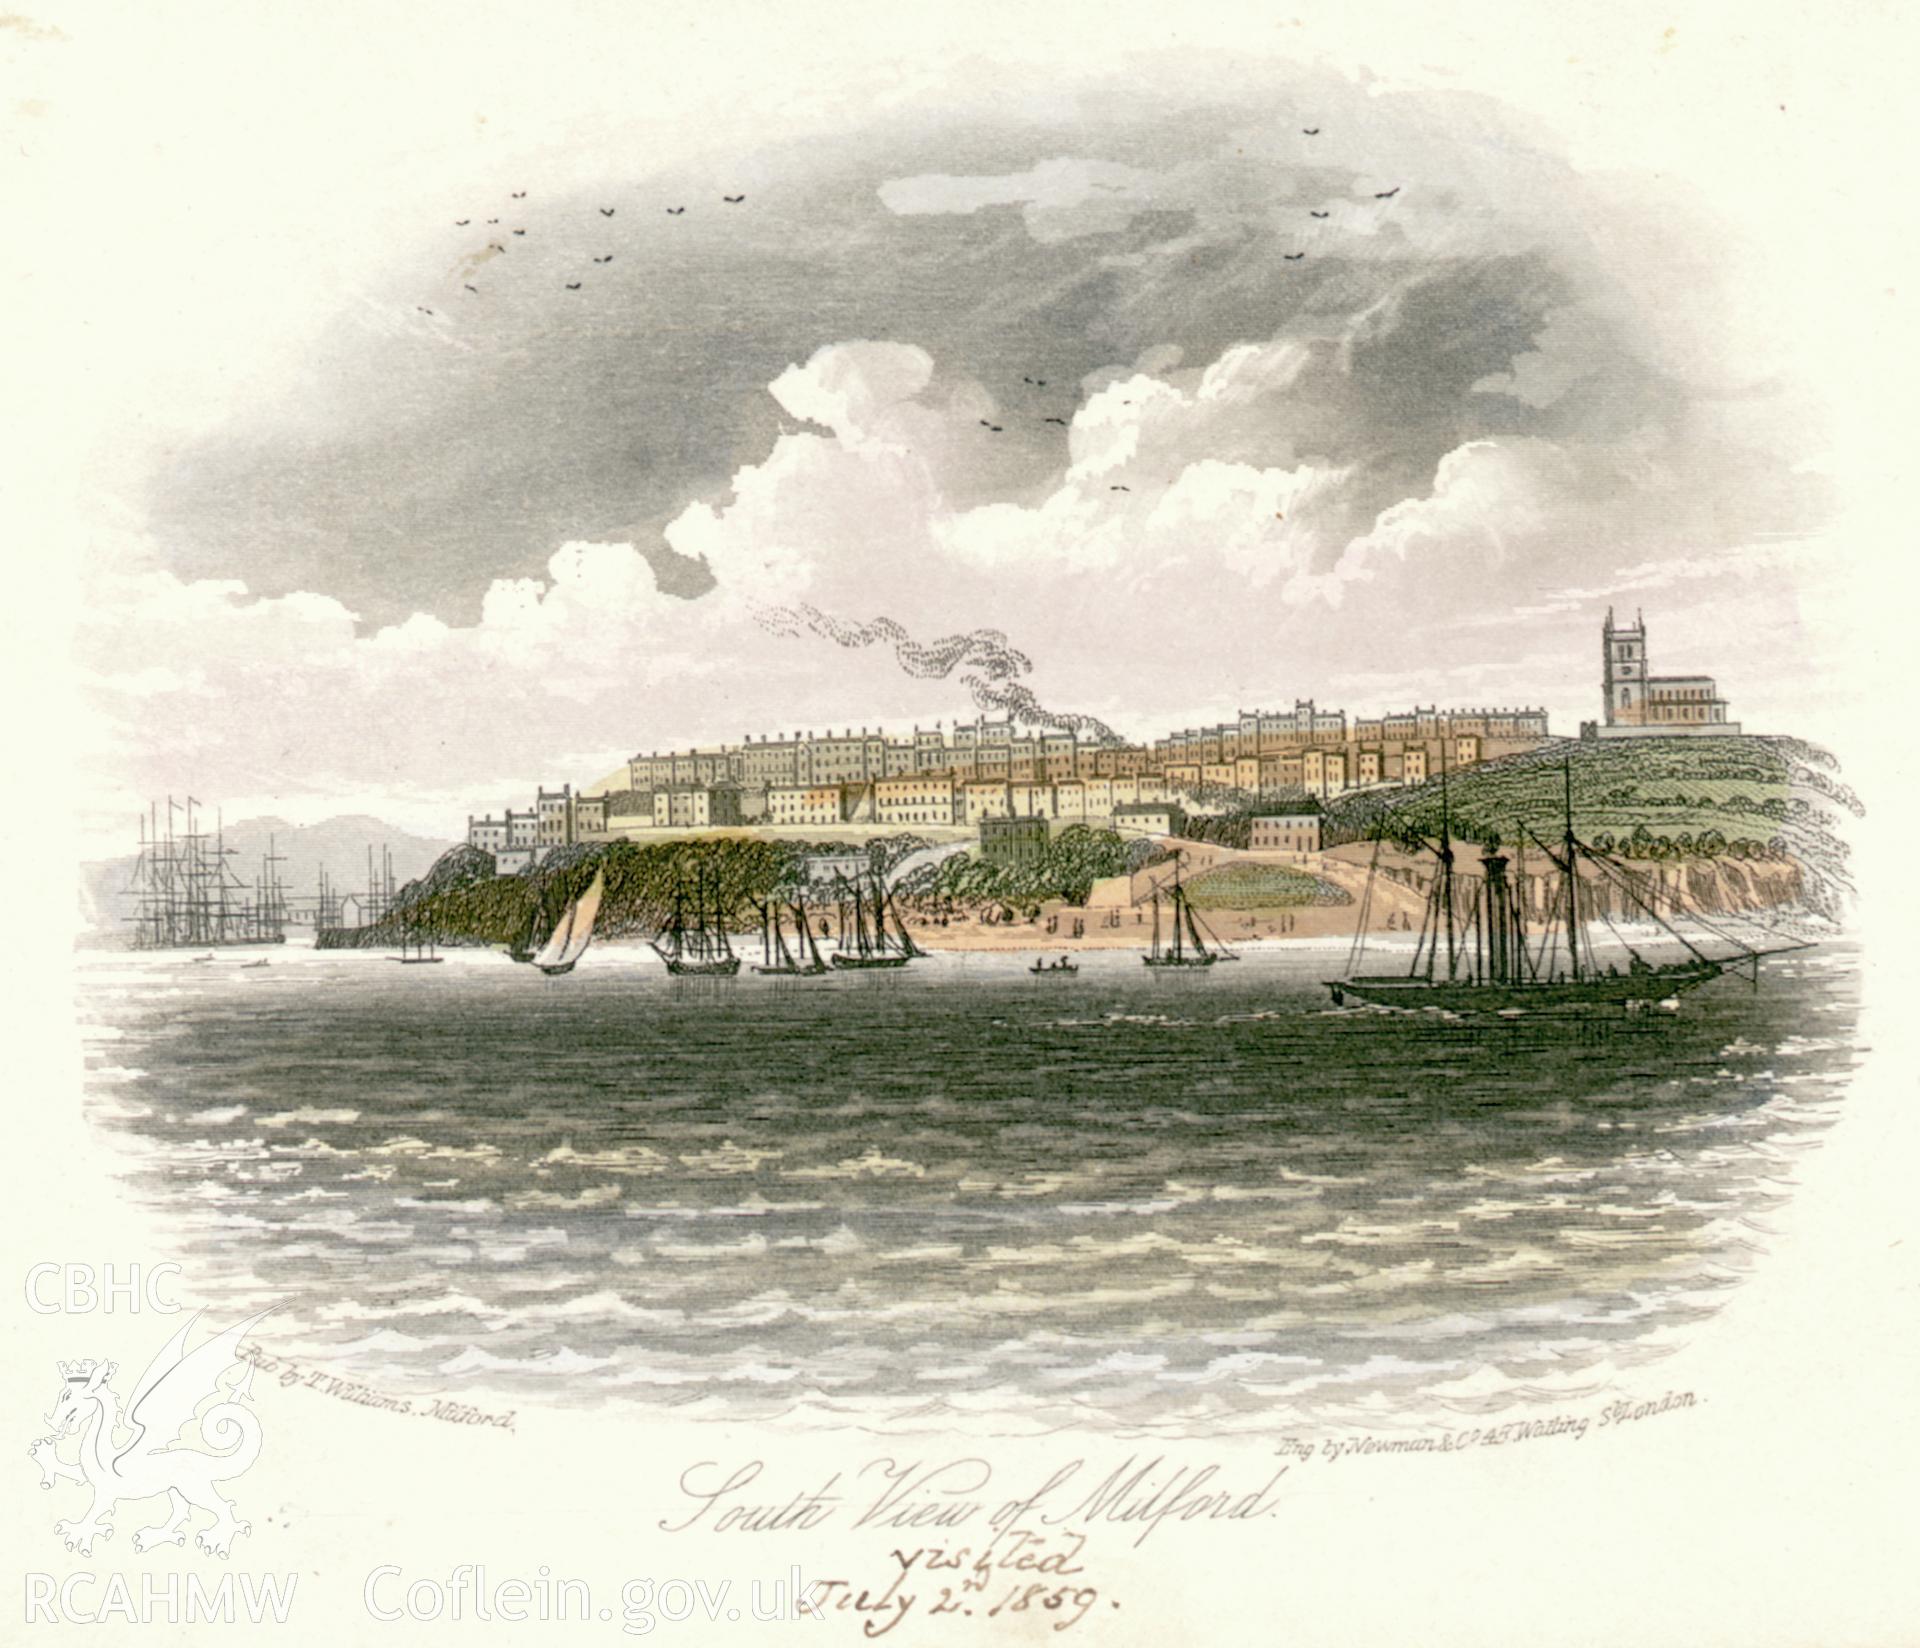 A postcard with a colour engraving of Milford Haven